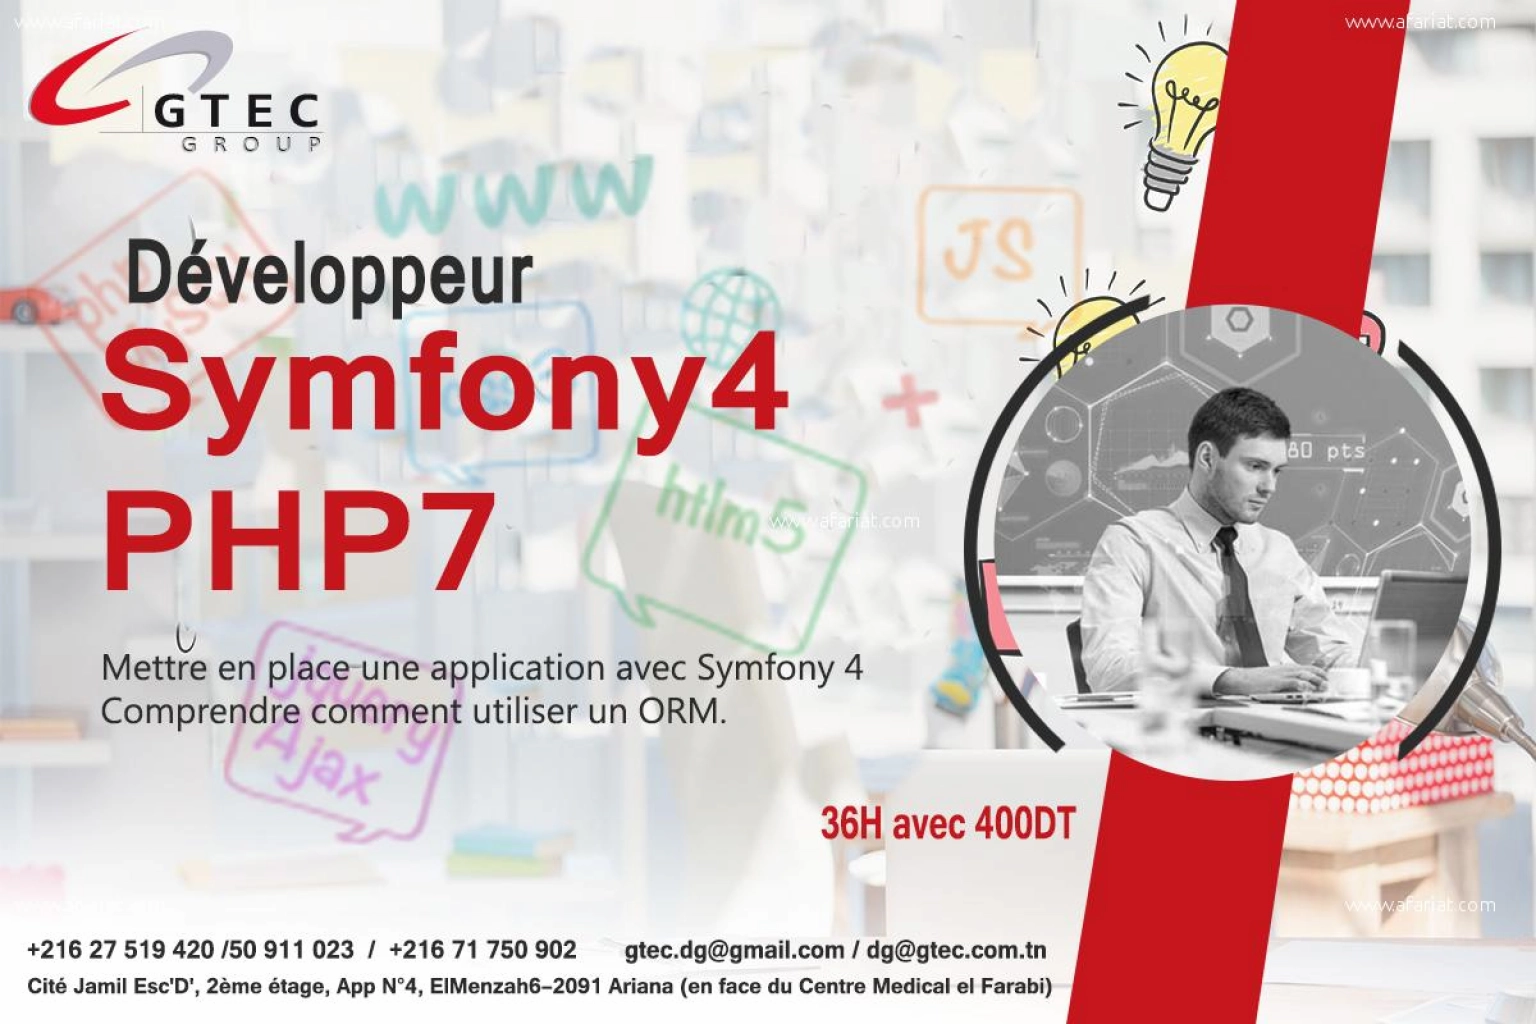 Formation PHP7/Symfony4 chez GTEC GROUP